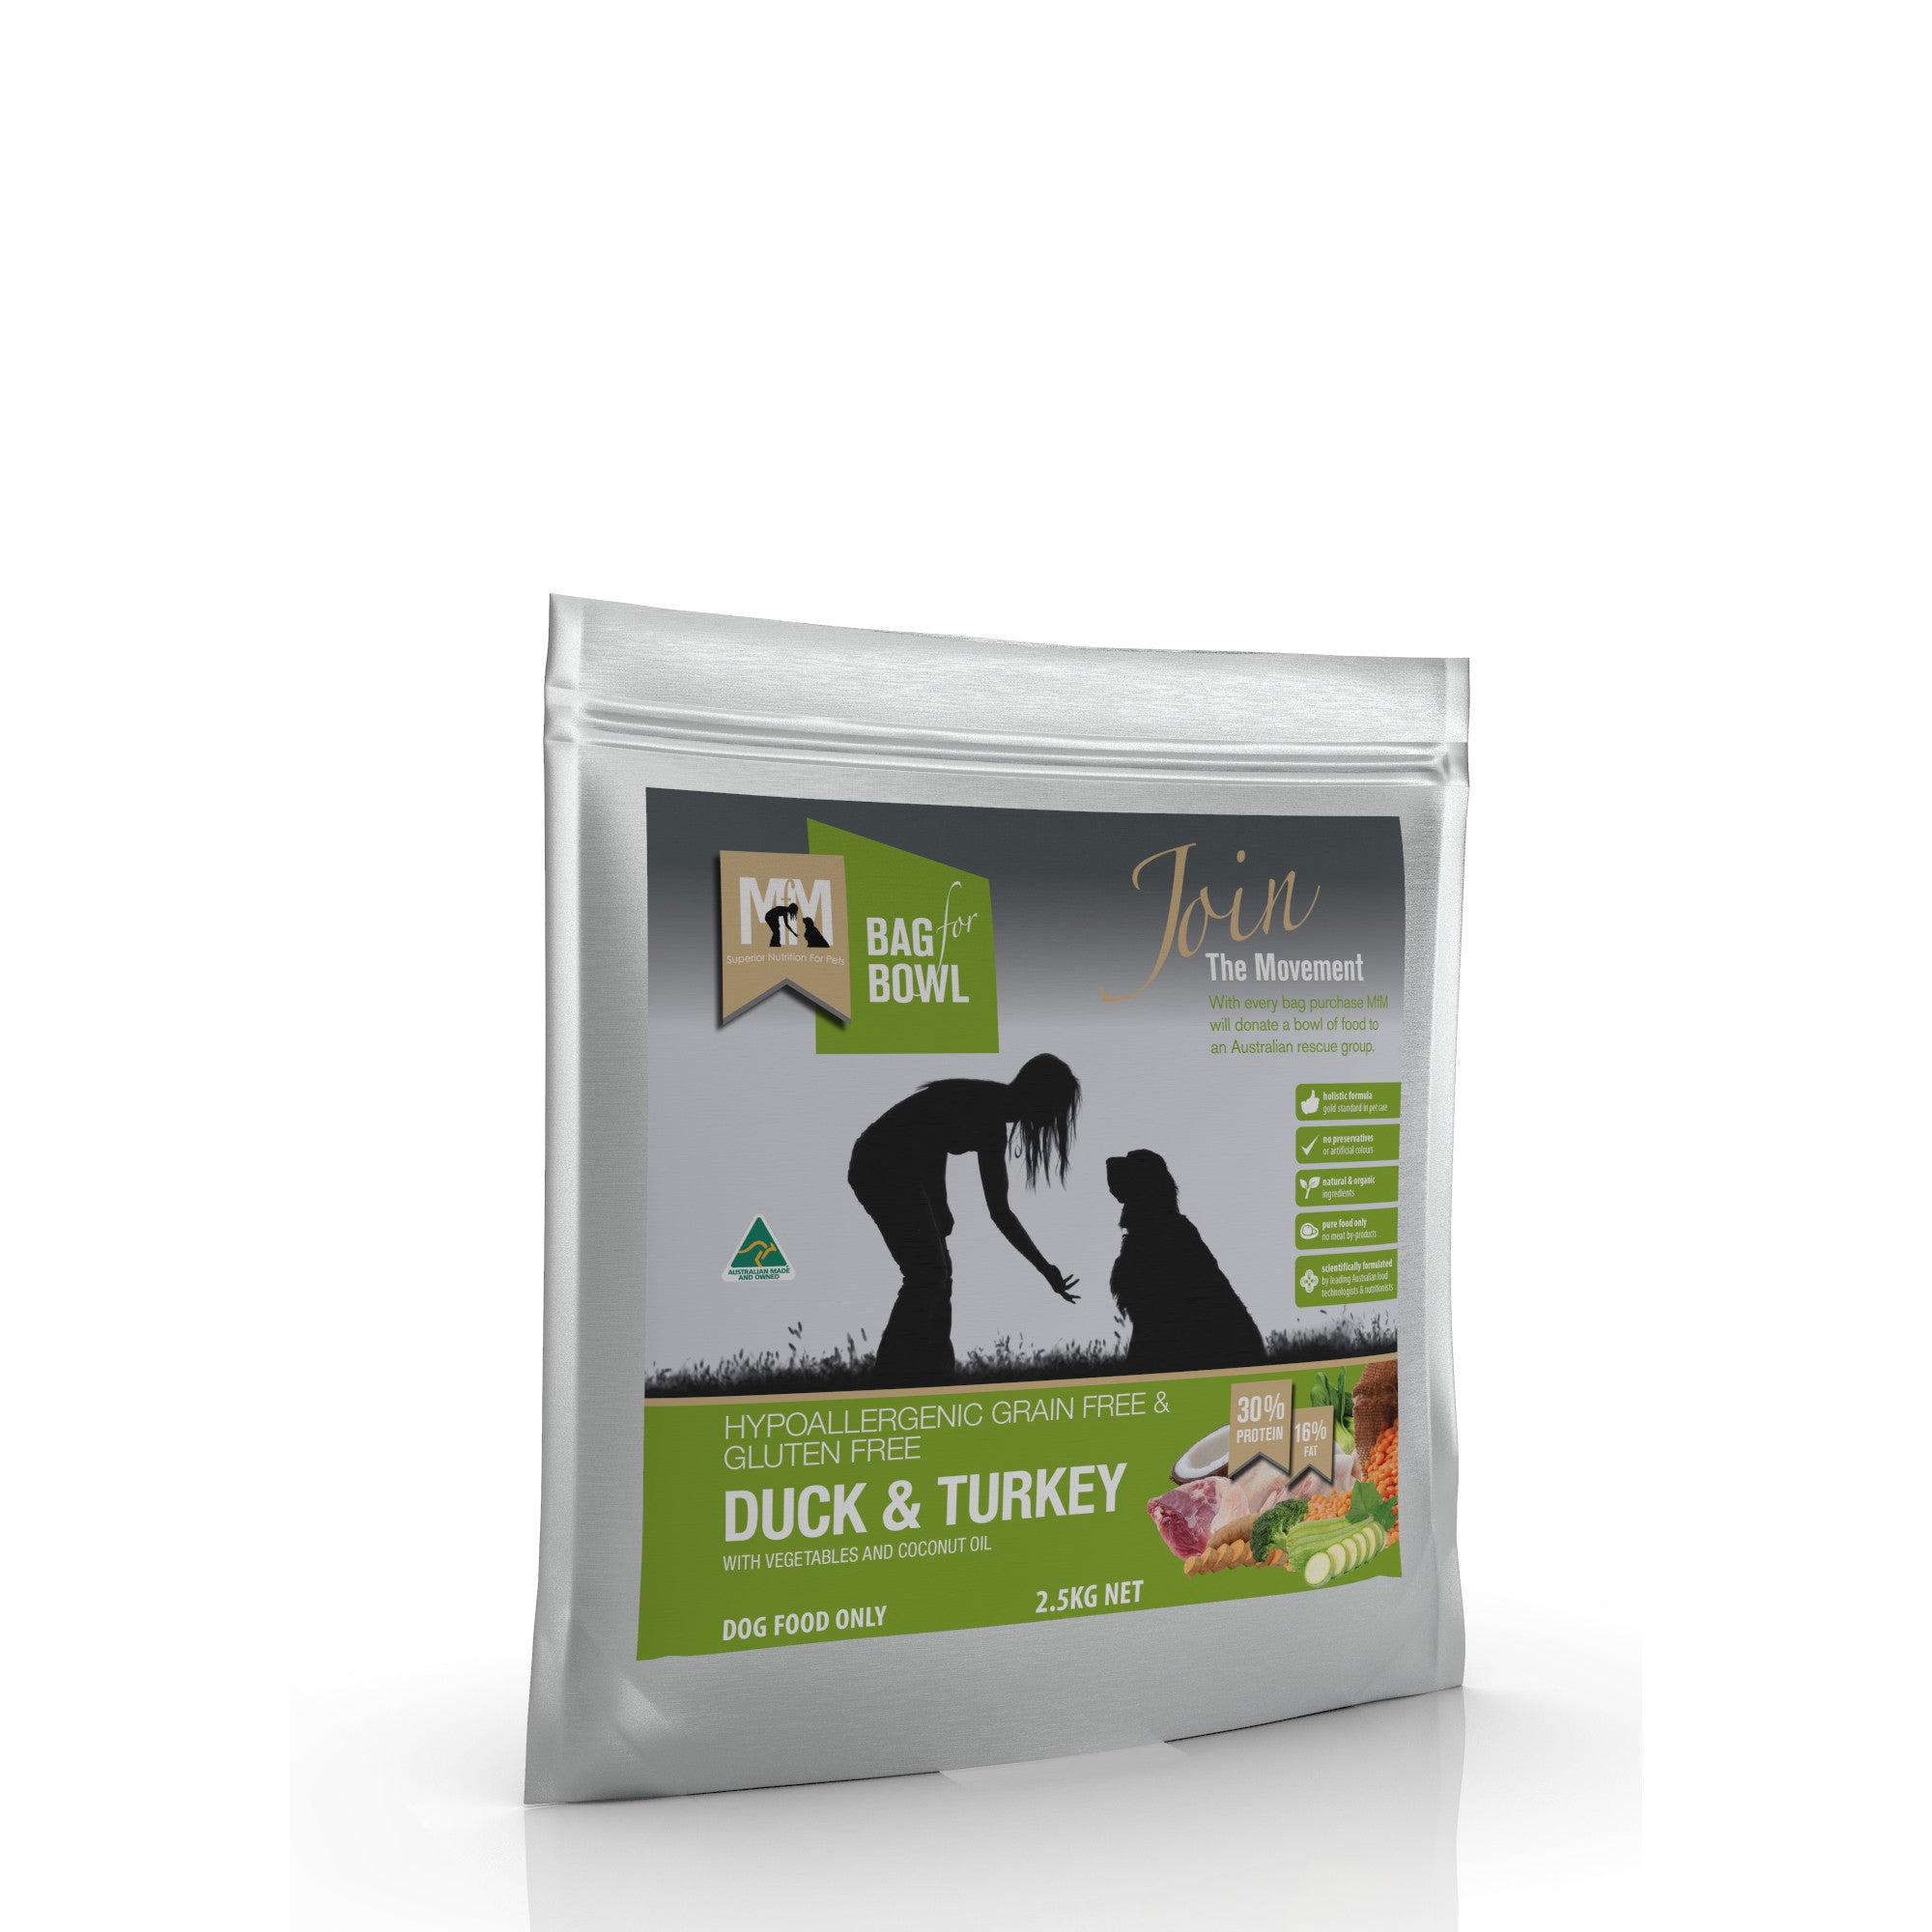 Meals for Mutts Grain Free Duck & Turkey Dog Food 2.5kg.